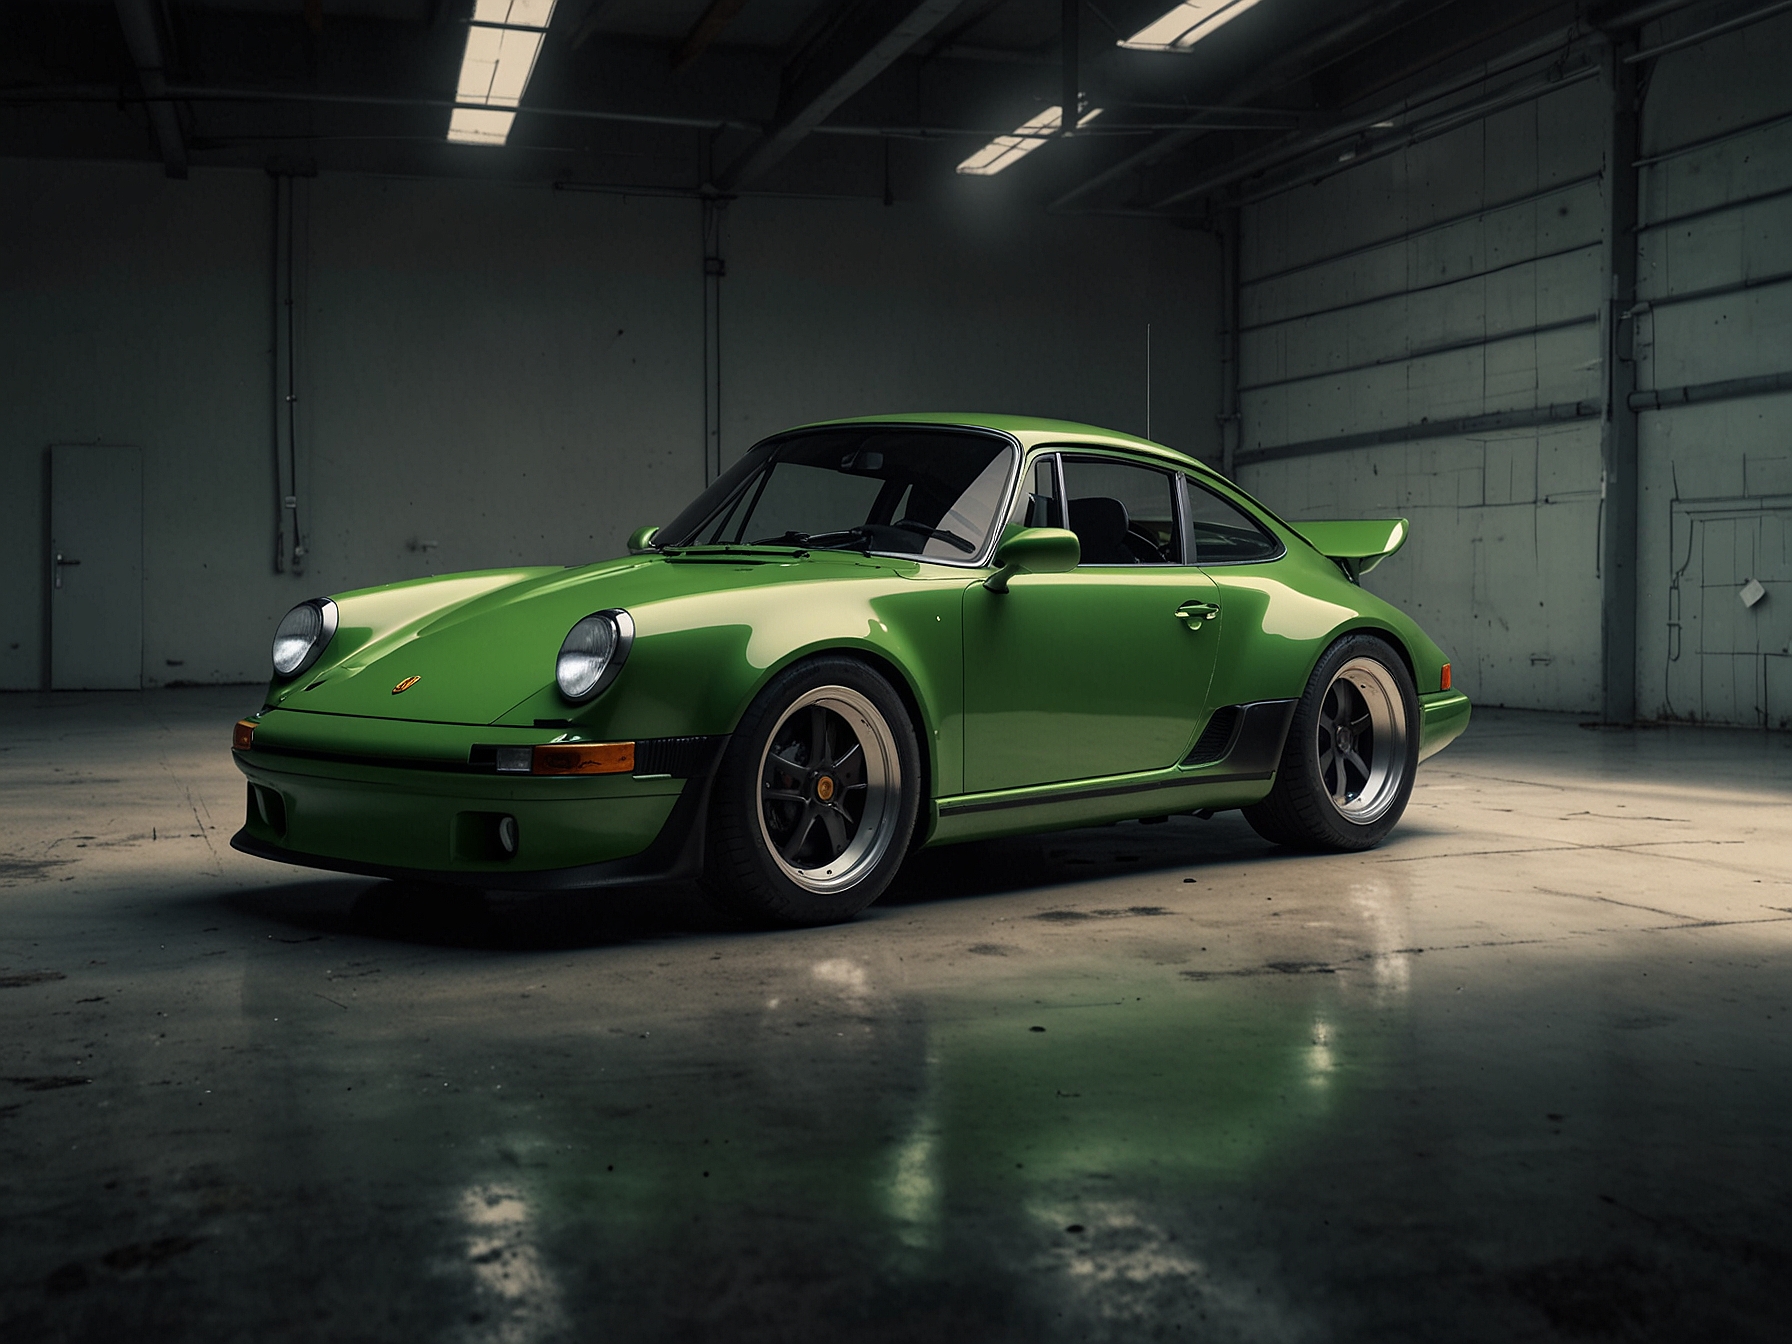 The RUF SCR 2022 in striking Light Green, showcasing its retro 911 styling and advanced carbon fiber construction. A true blend of classic Porsche design and modern technology.